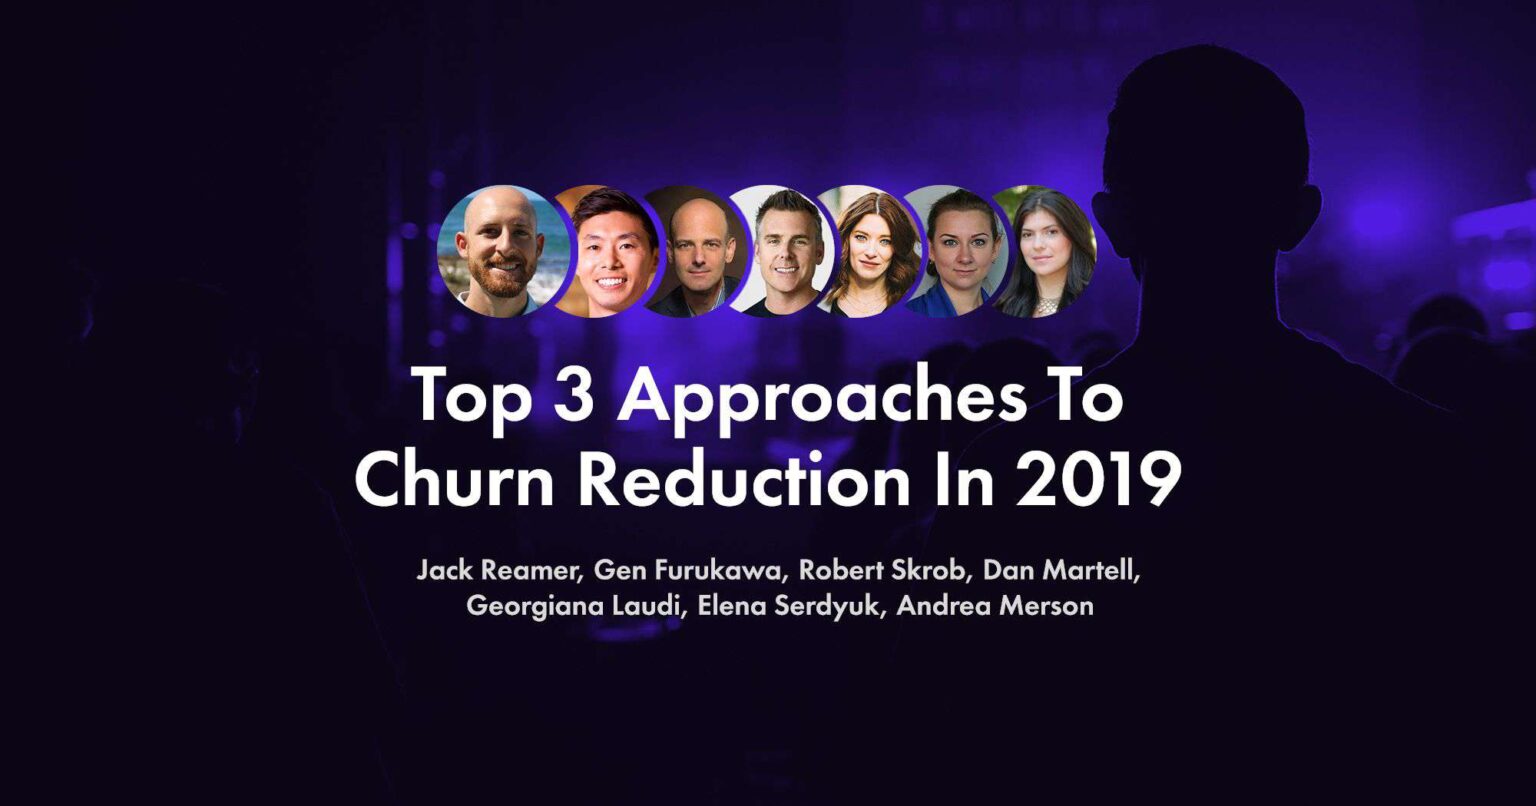 3 Approaches To Churn Reduction In 2019